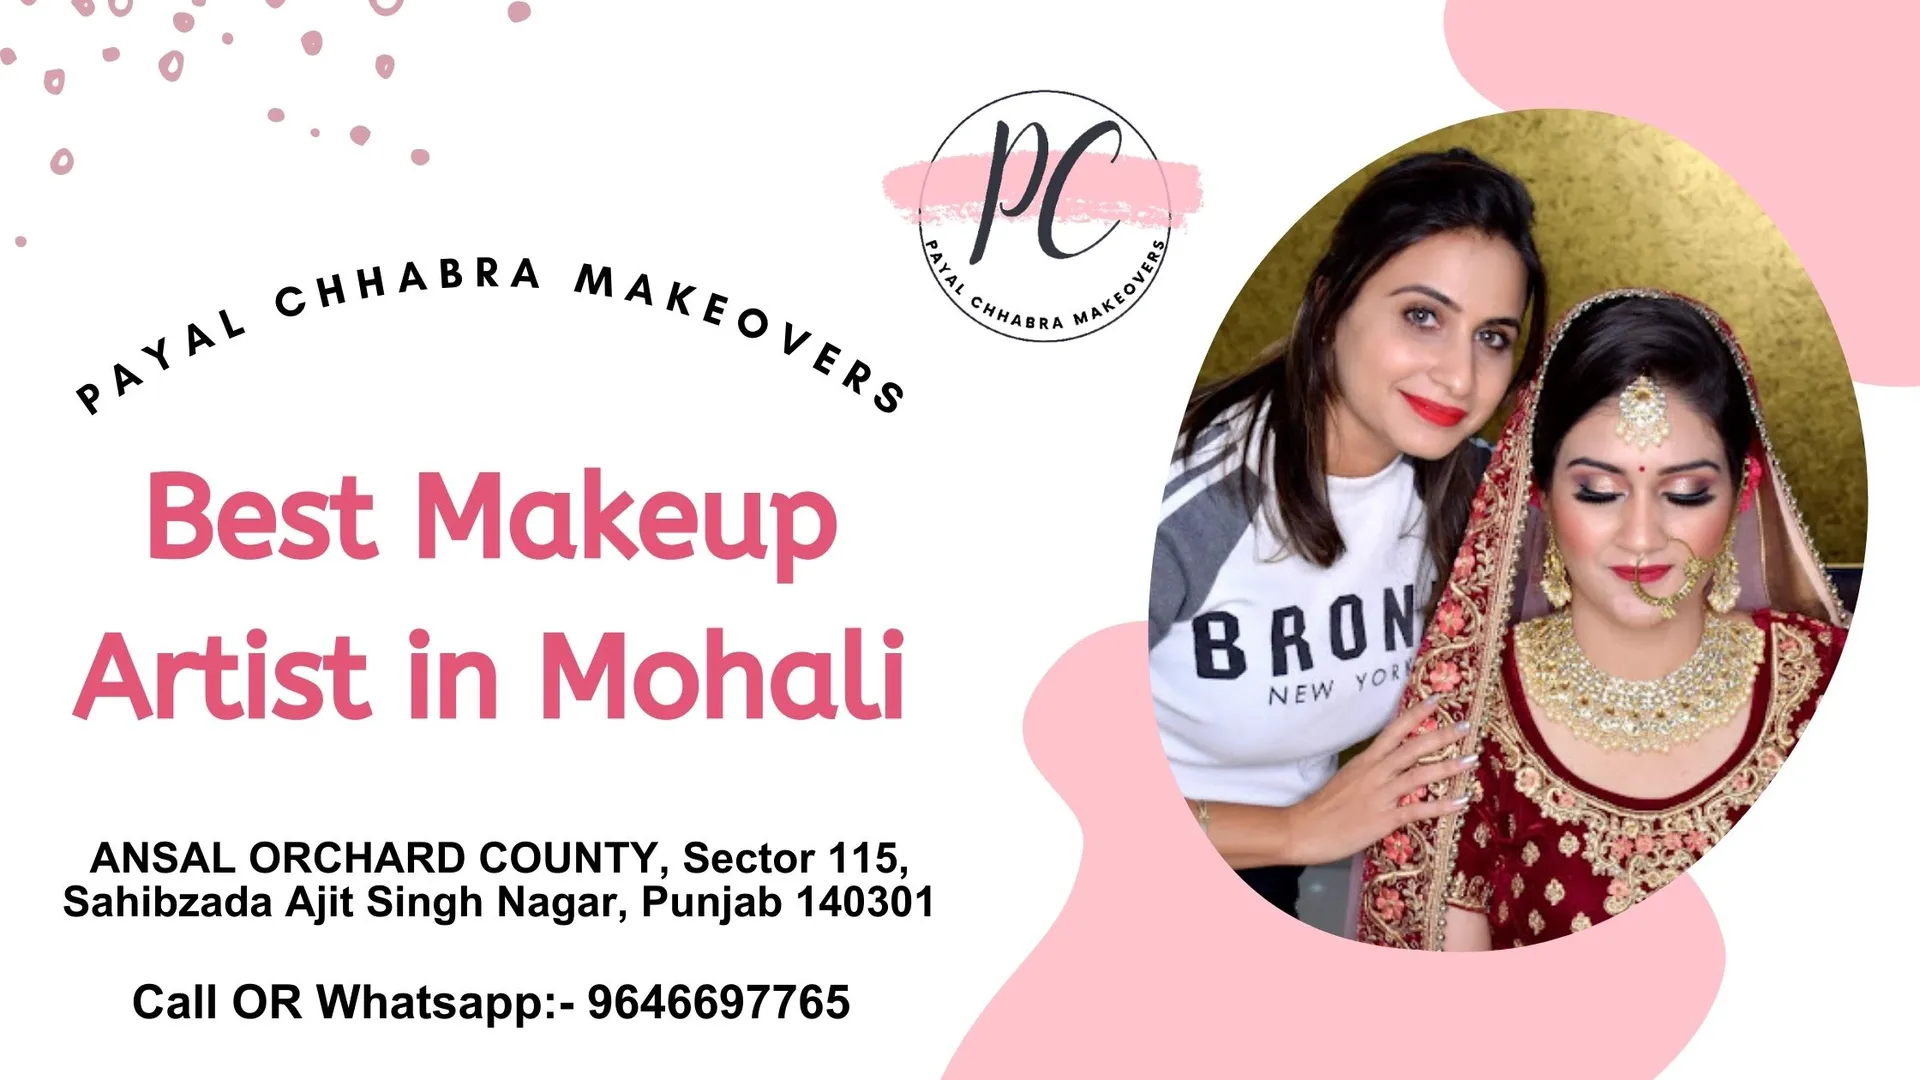 Experience the magic of transformation with Payal Chhabra, acclaimed as the best makeup artist in Mohali. With an artistic flair and a keen eye for detail, Payal crafts mesmerizing makeovers that enhance your natural beauty.

For an enchanting beauty journey in Mohali, entrust your dreams to Payal Chhabra Makeovers. Book your appointment now and embrace the allure of professional makeup artistry at its finest. https://g.co/kgs/7eMr4B